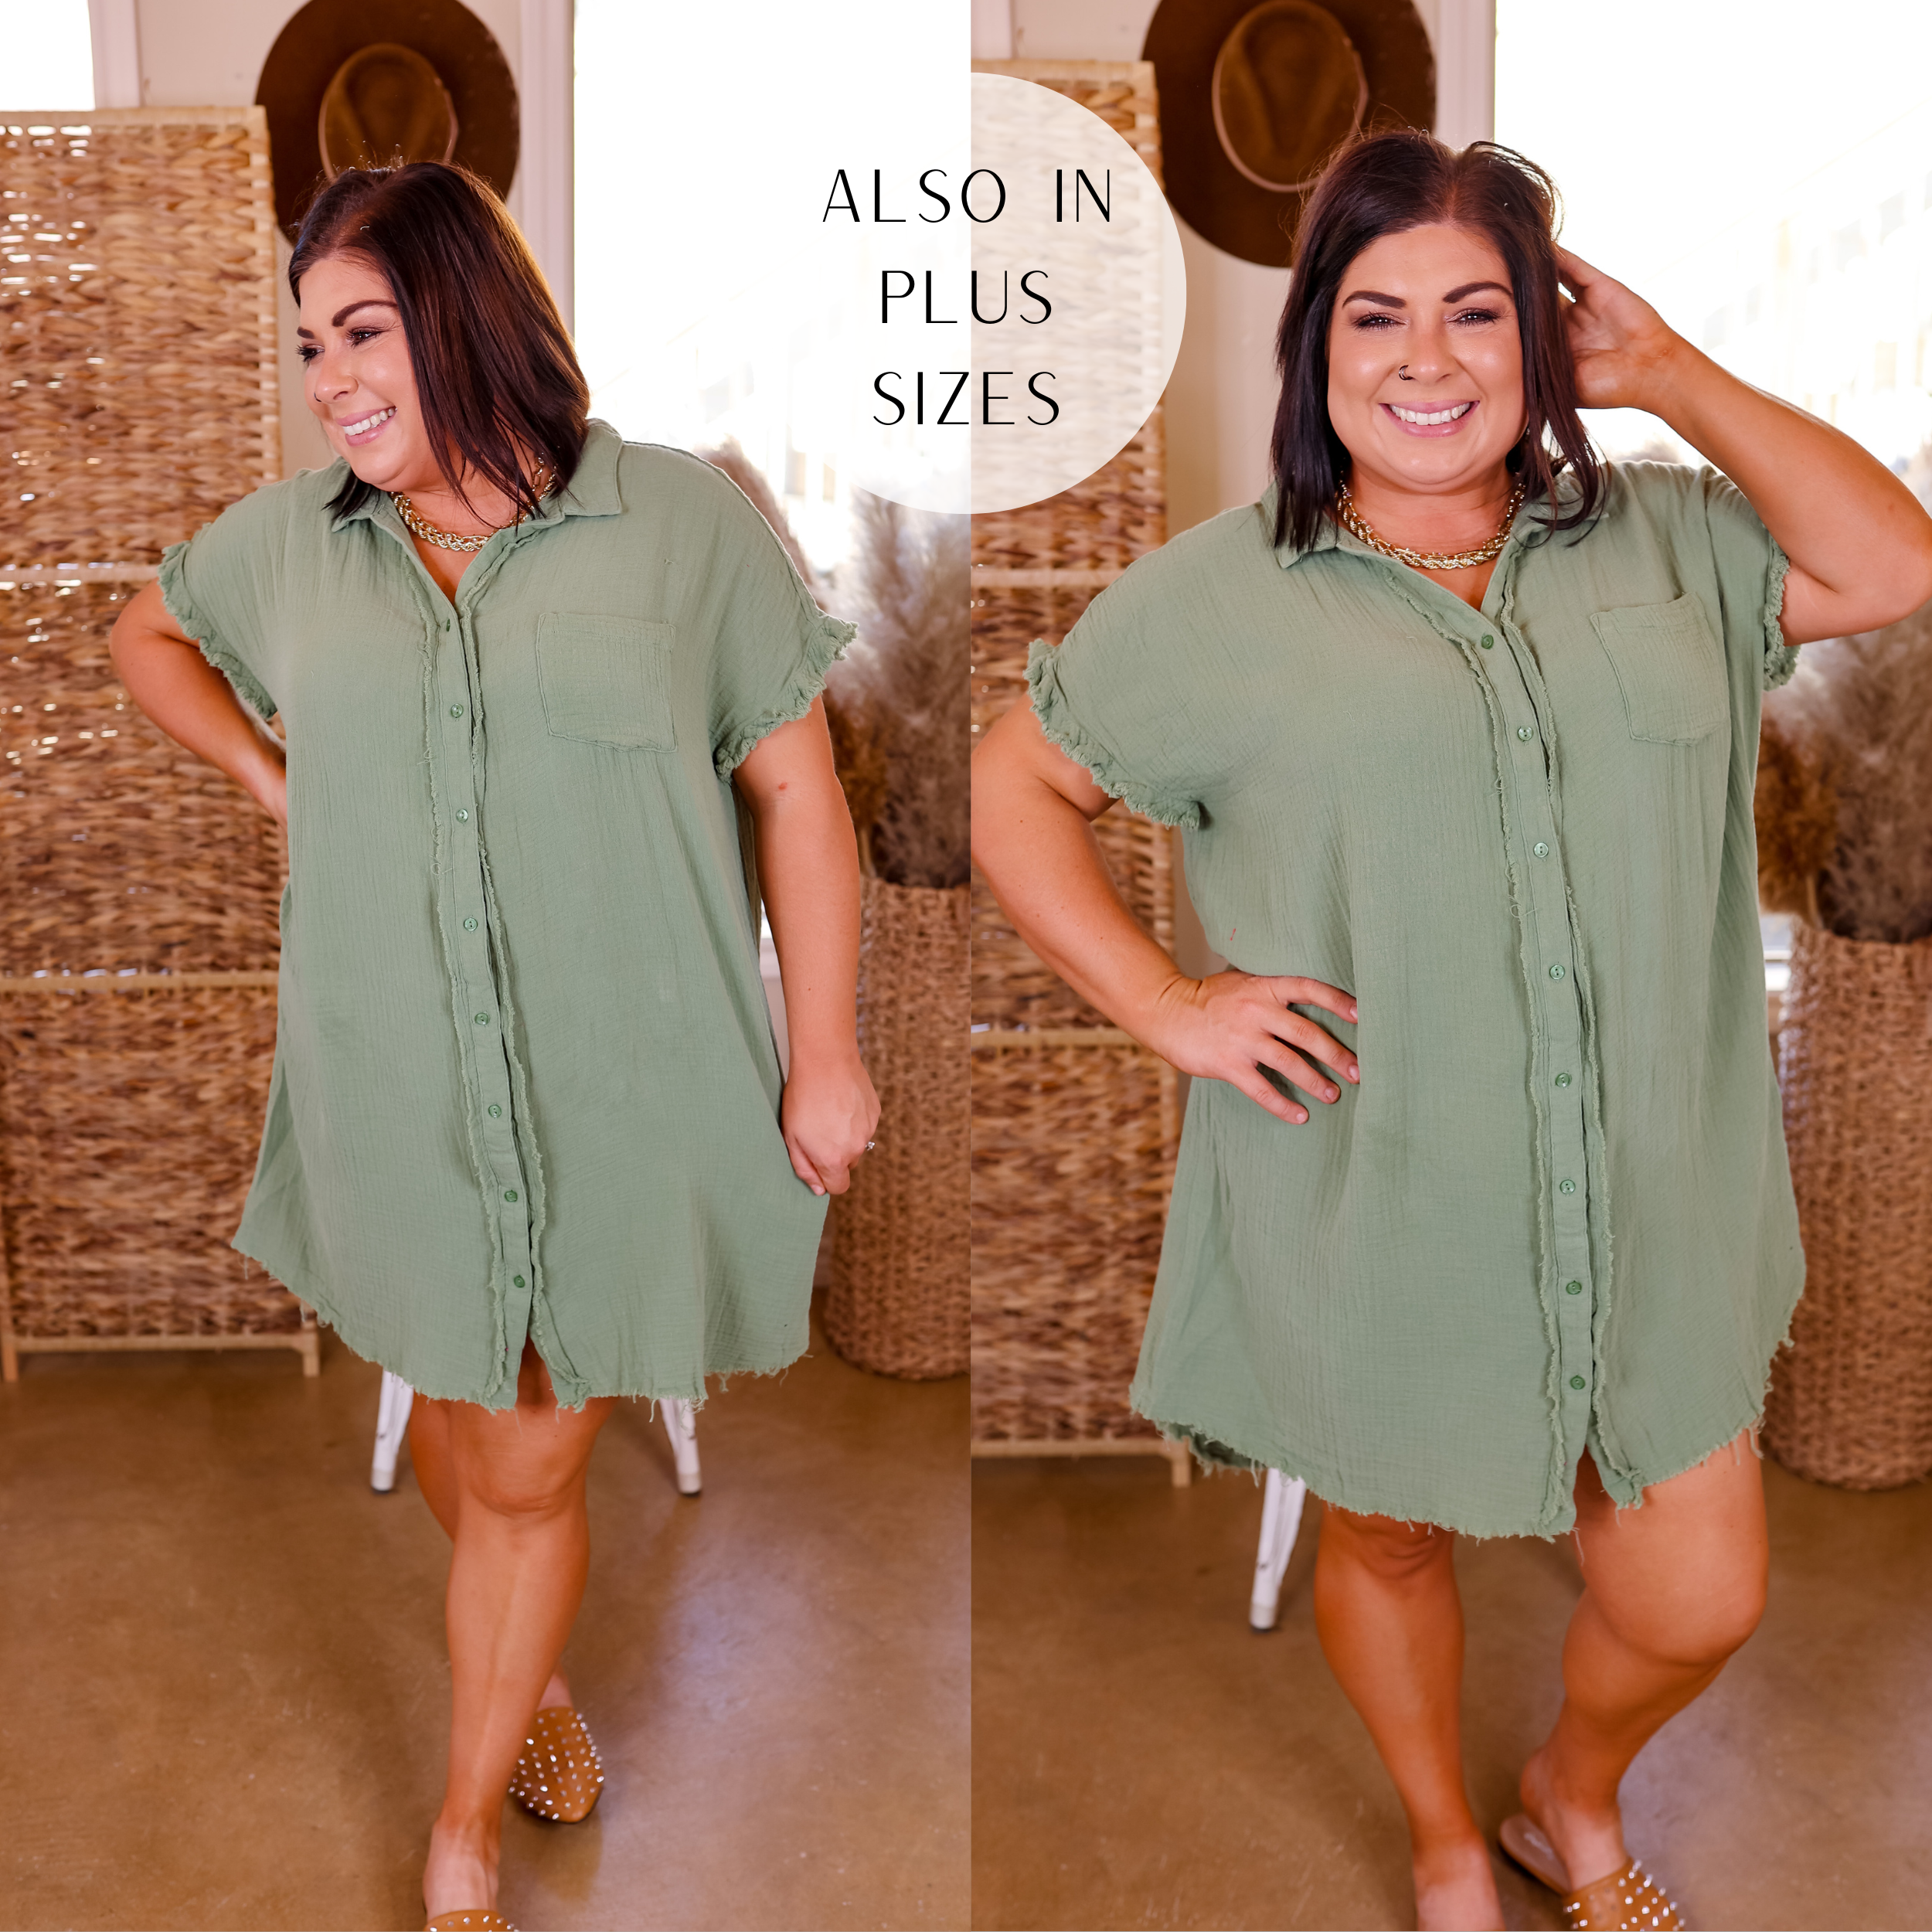 Spring Glow Button Up Raw Hem Dress in Sage Green - Giddy Up Glamour Boutique